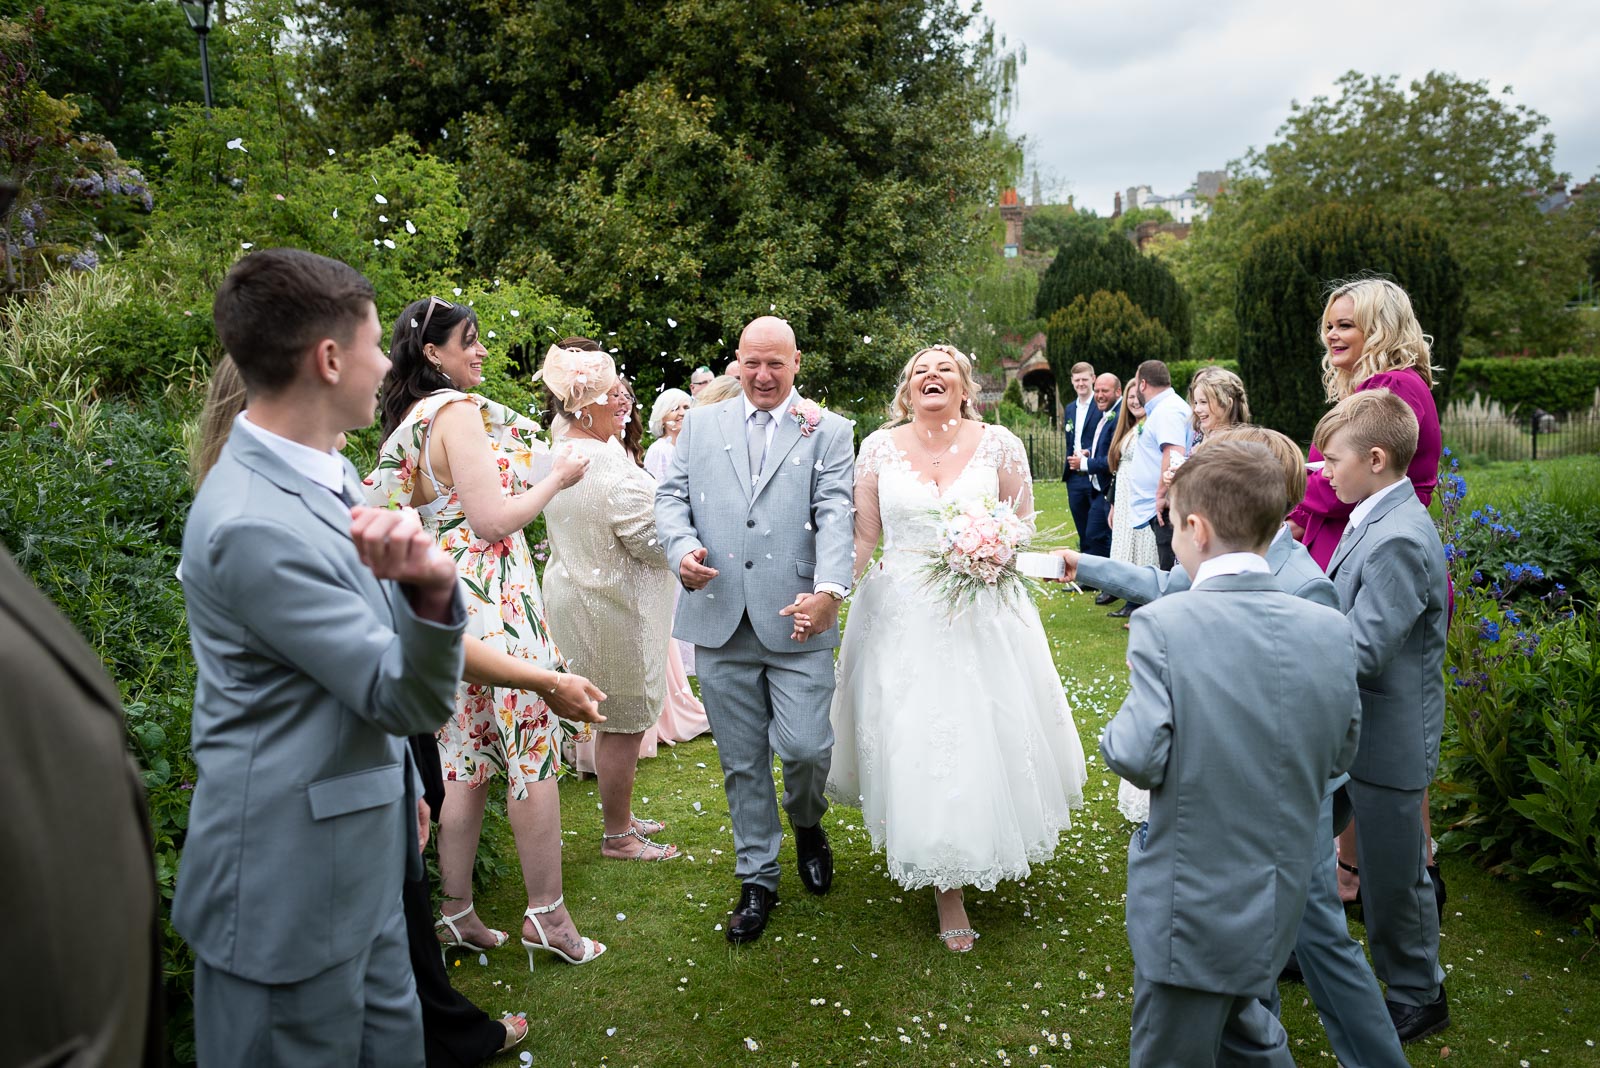 Lou laughs as her and Matt walk through rose petal confetti thrown by friends and family at Southover Grange Lewes.